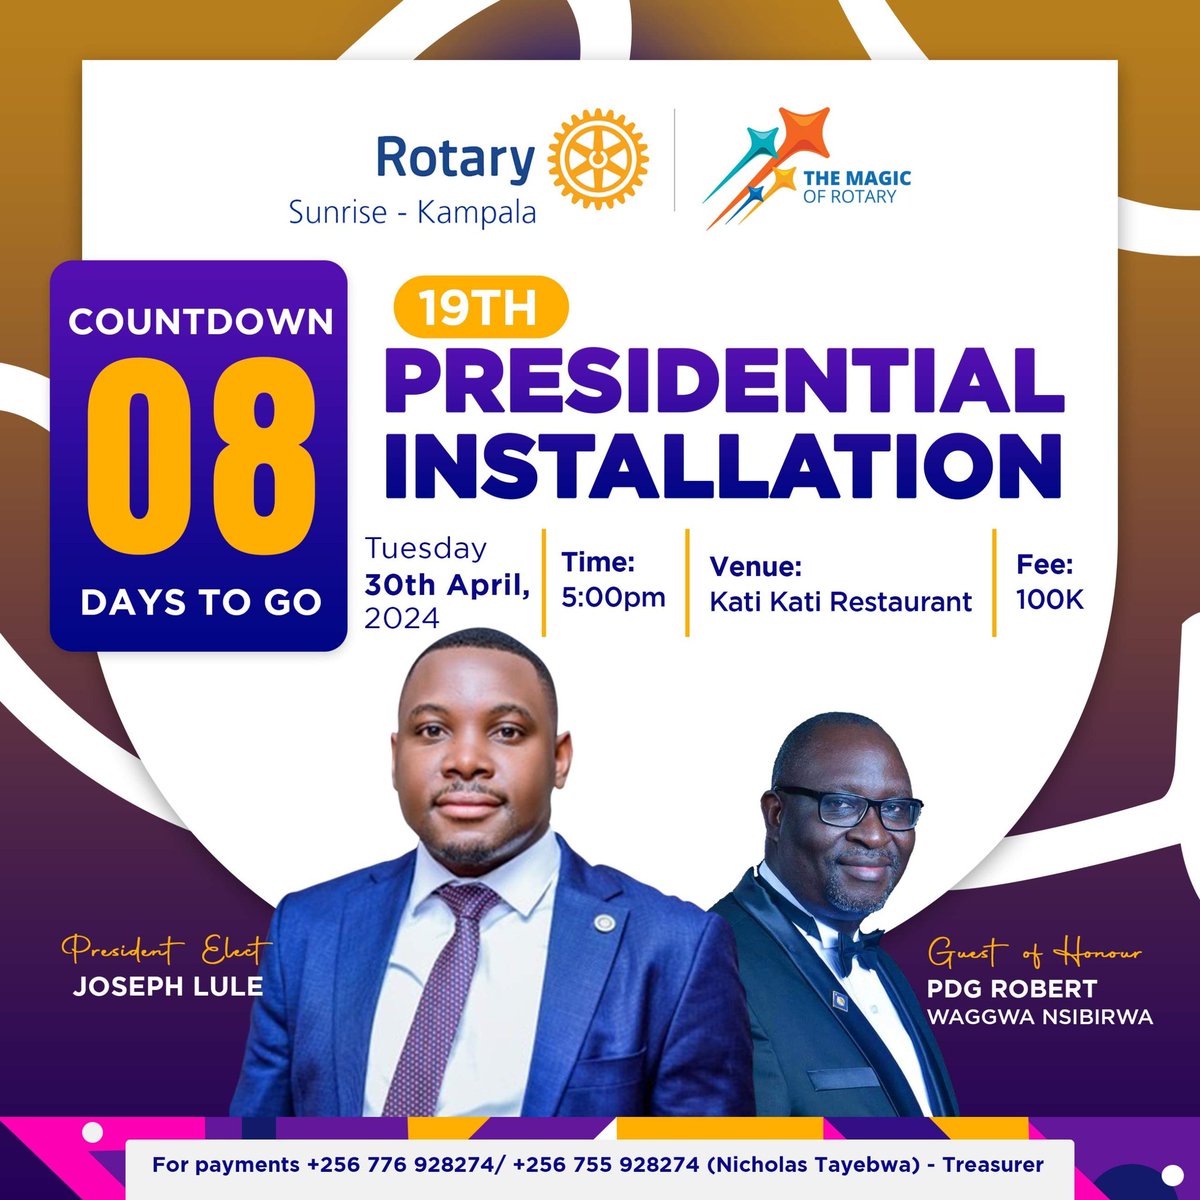 *8 DAYS NOW*.............. @RotaryClubofSu2 invites for their 19th presidential installation of PE @Lulejoseph Venue. Kati kati restaurant. Fee:100k For more details &Payments Call 0776928274 0755928274(Nicholas tayembwa -treasurer) *#19ThPresidentialInstallation*